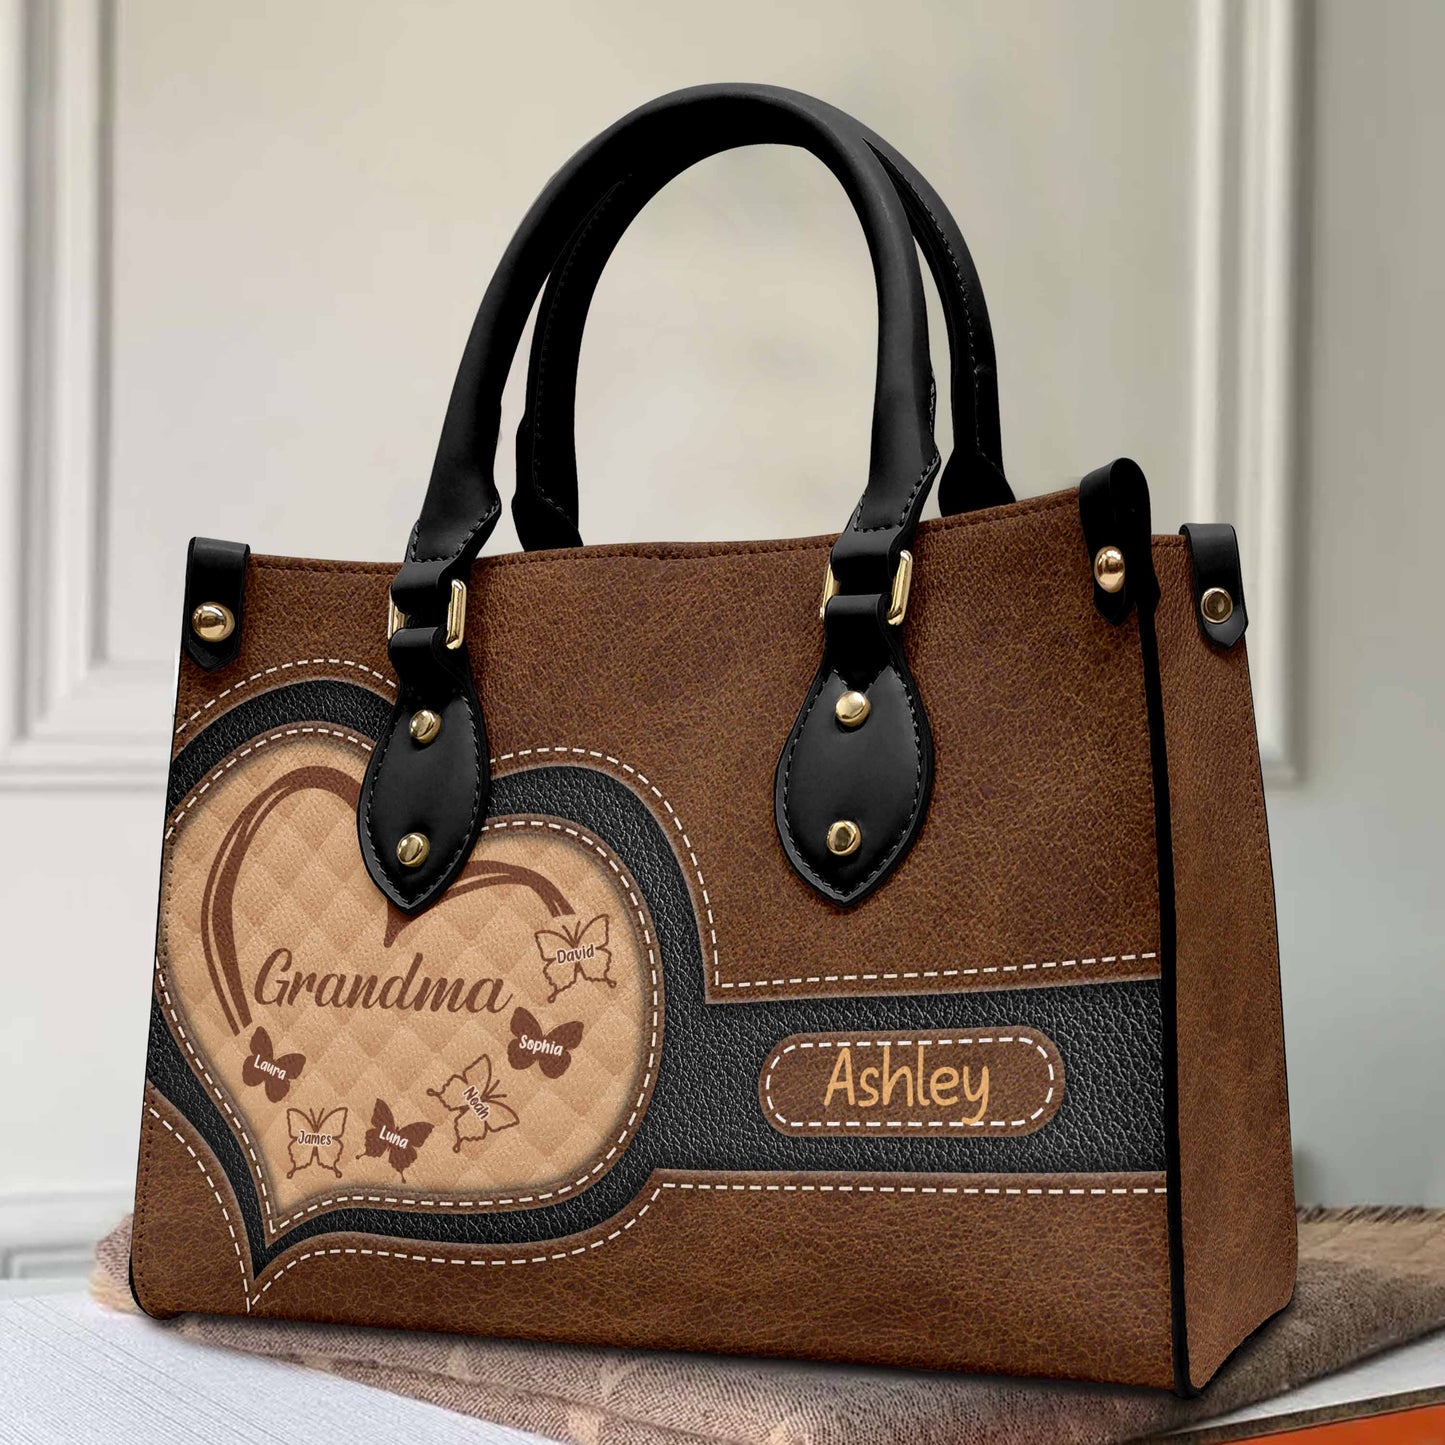 Grandma - Butterfly Version - Personalized Leather Bag